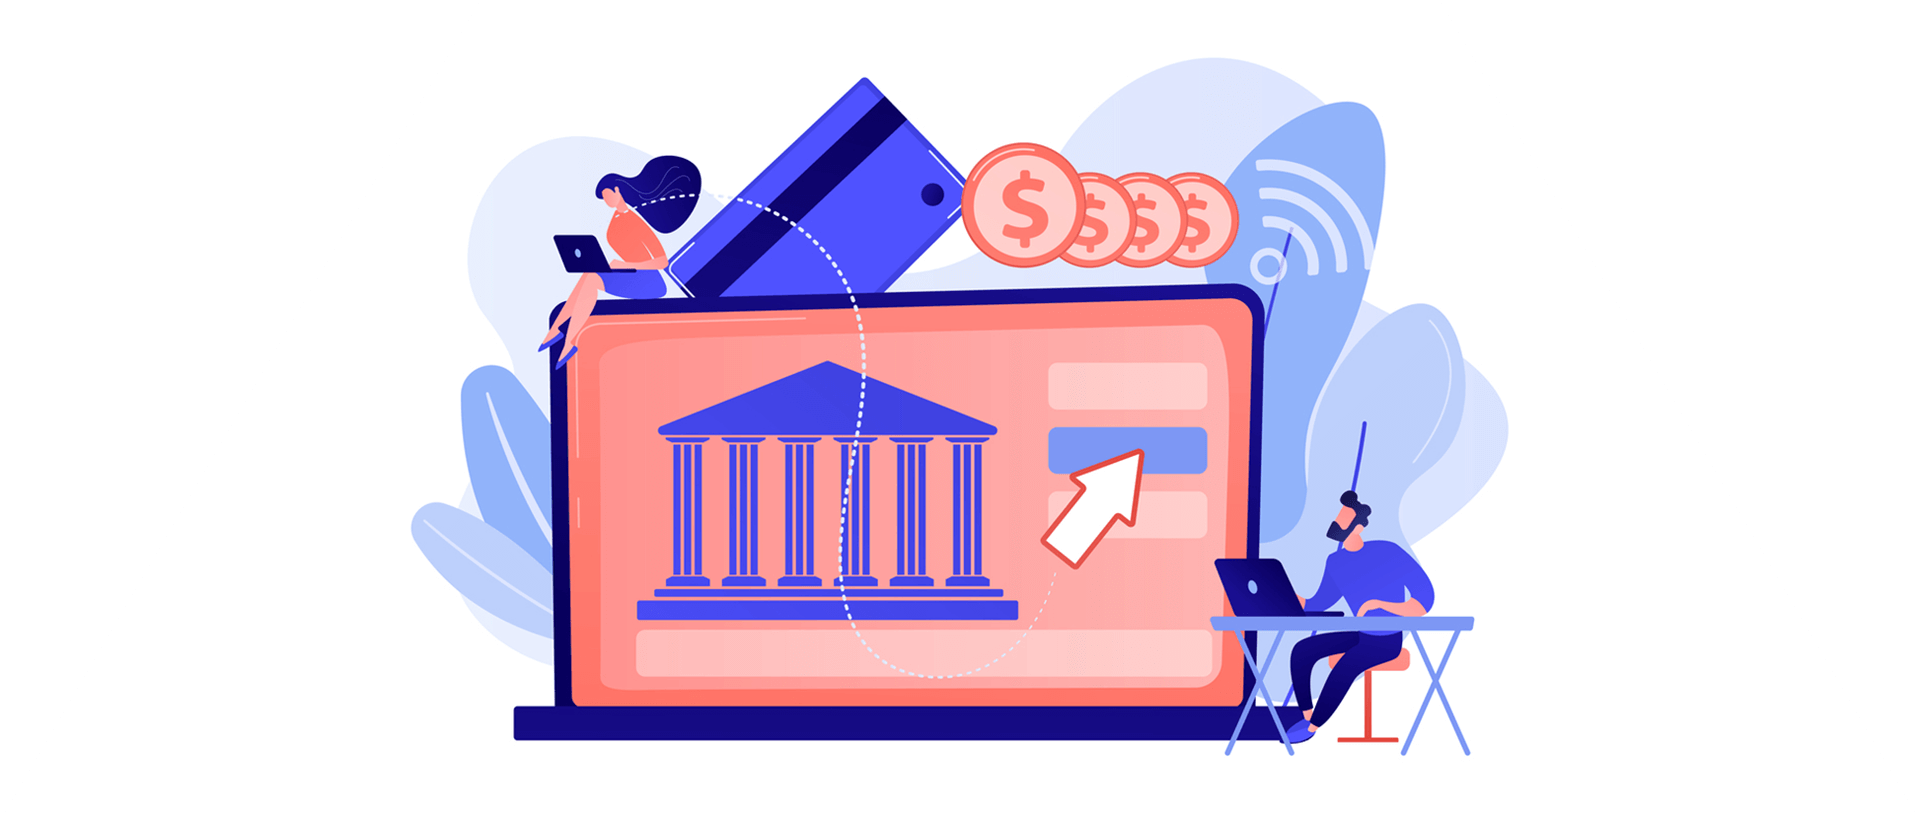 everything about open banking